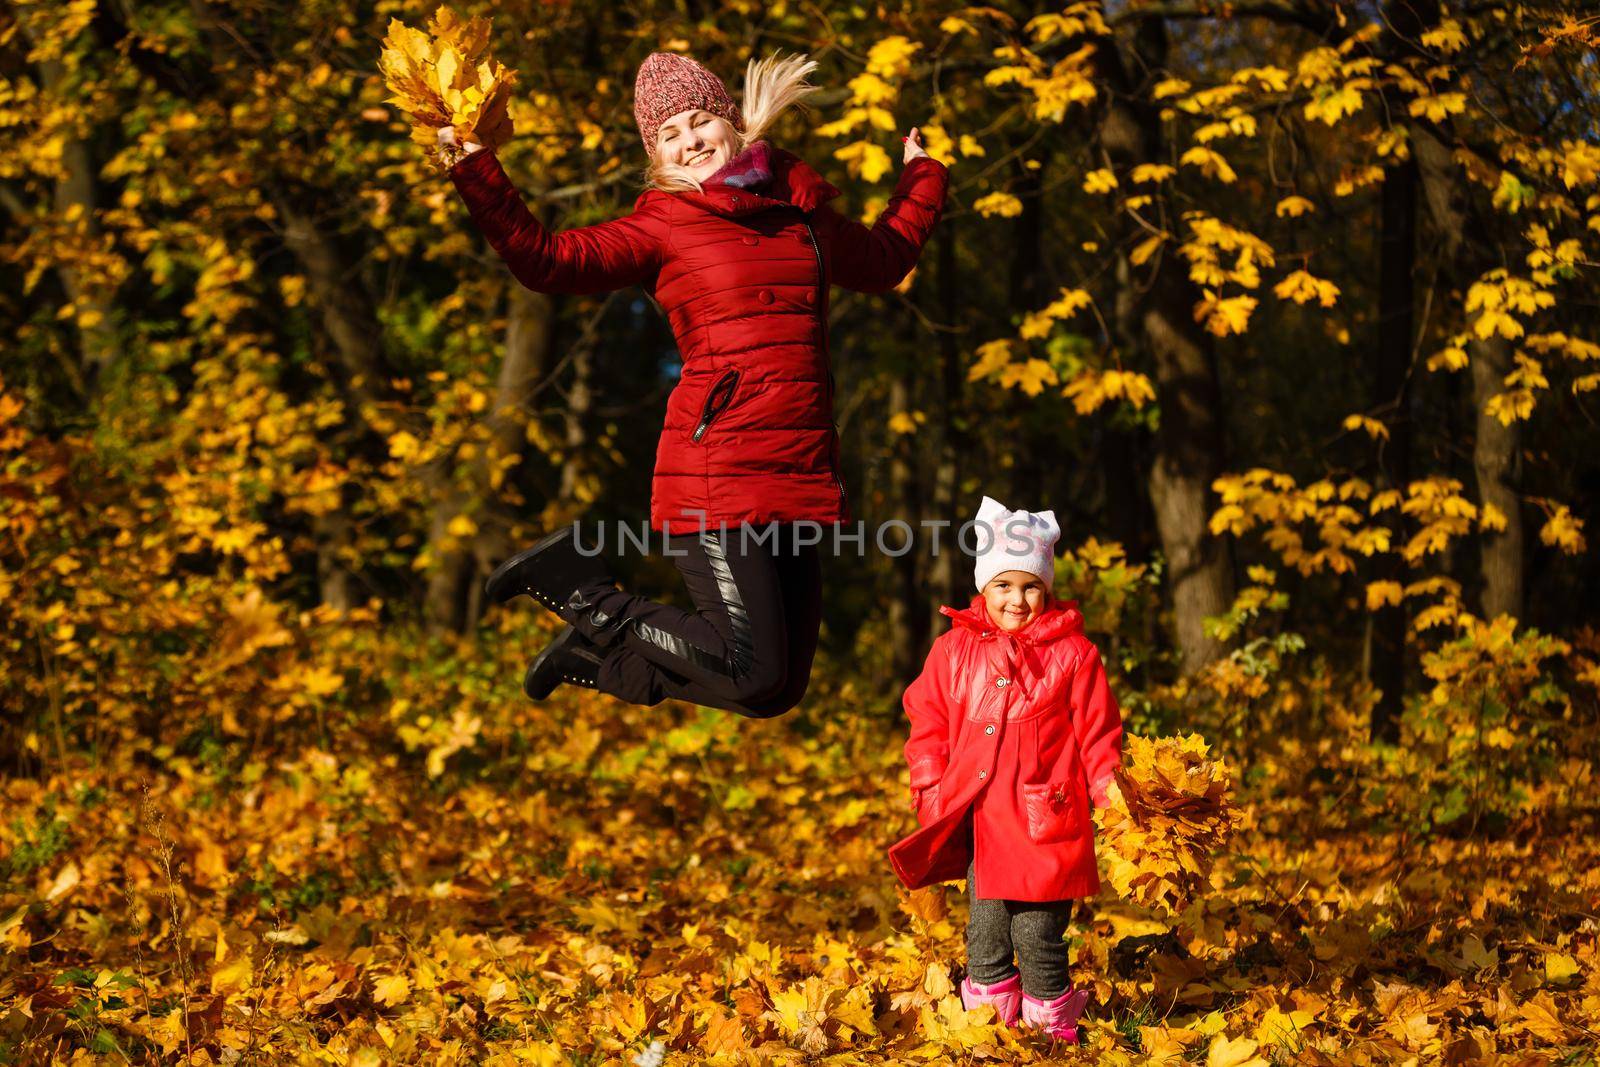 Mother and daughter having fun in the autumn park among the falling leaves